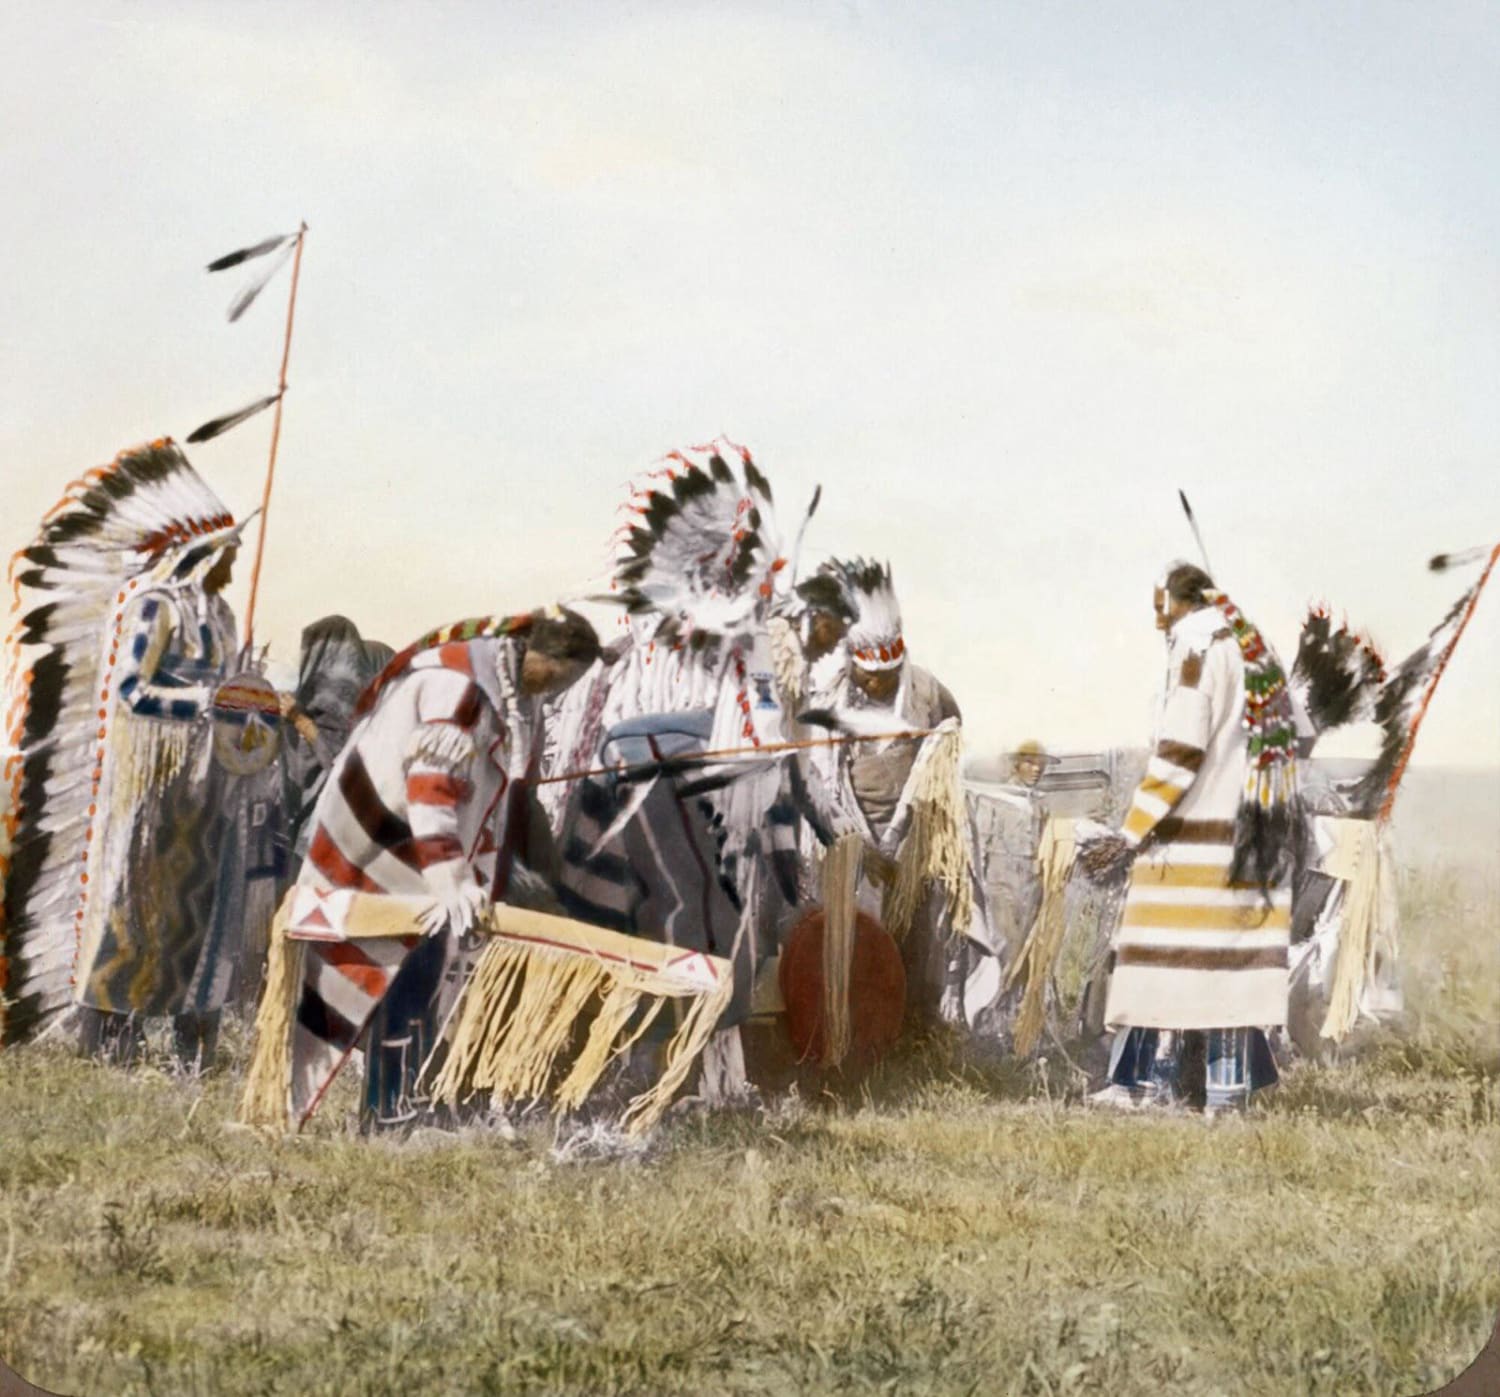 Native American grass dancers. 19th century photograph by Walter McClintock.